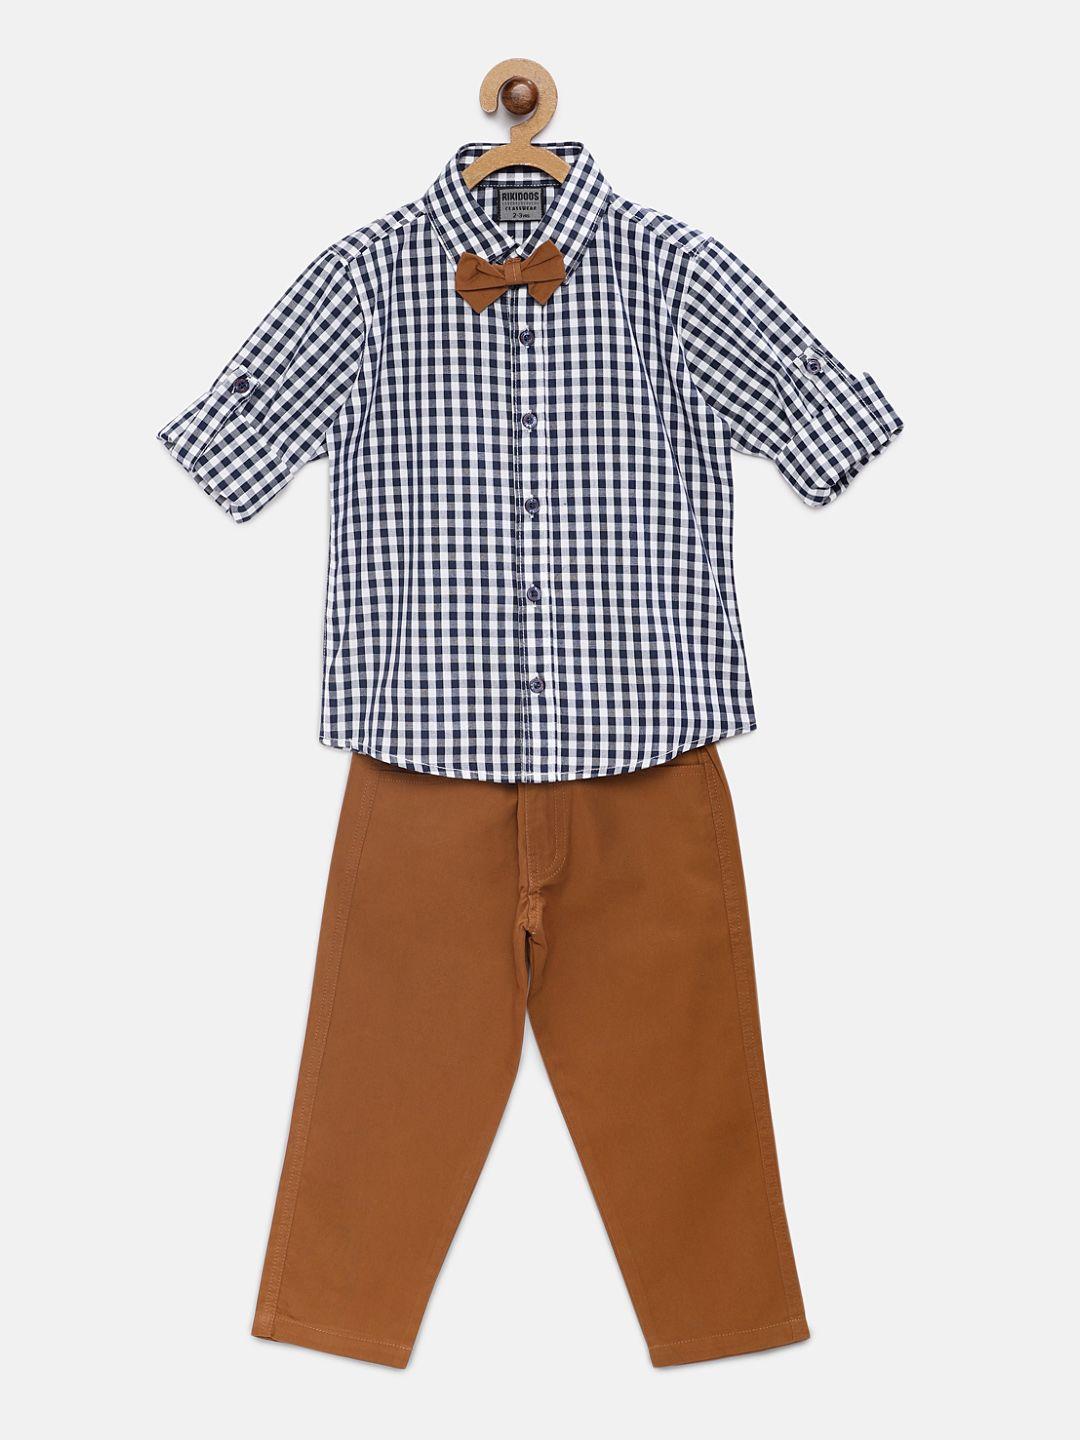 rikidoos boys navy blue & brown checked shirt with trousers